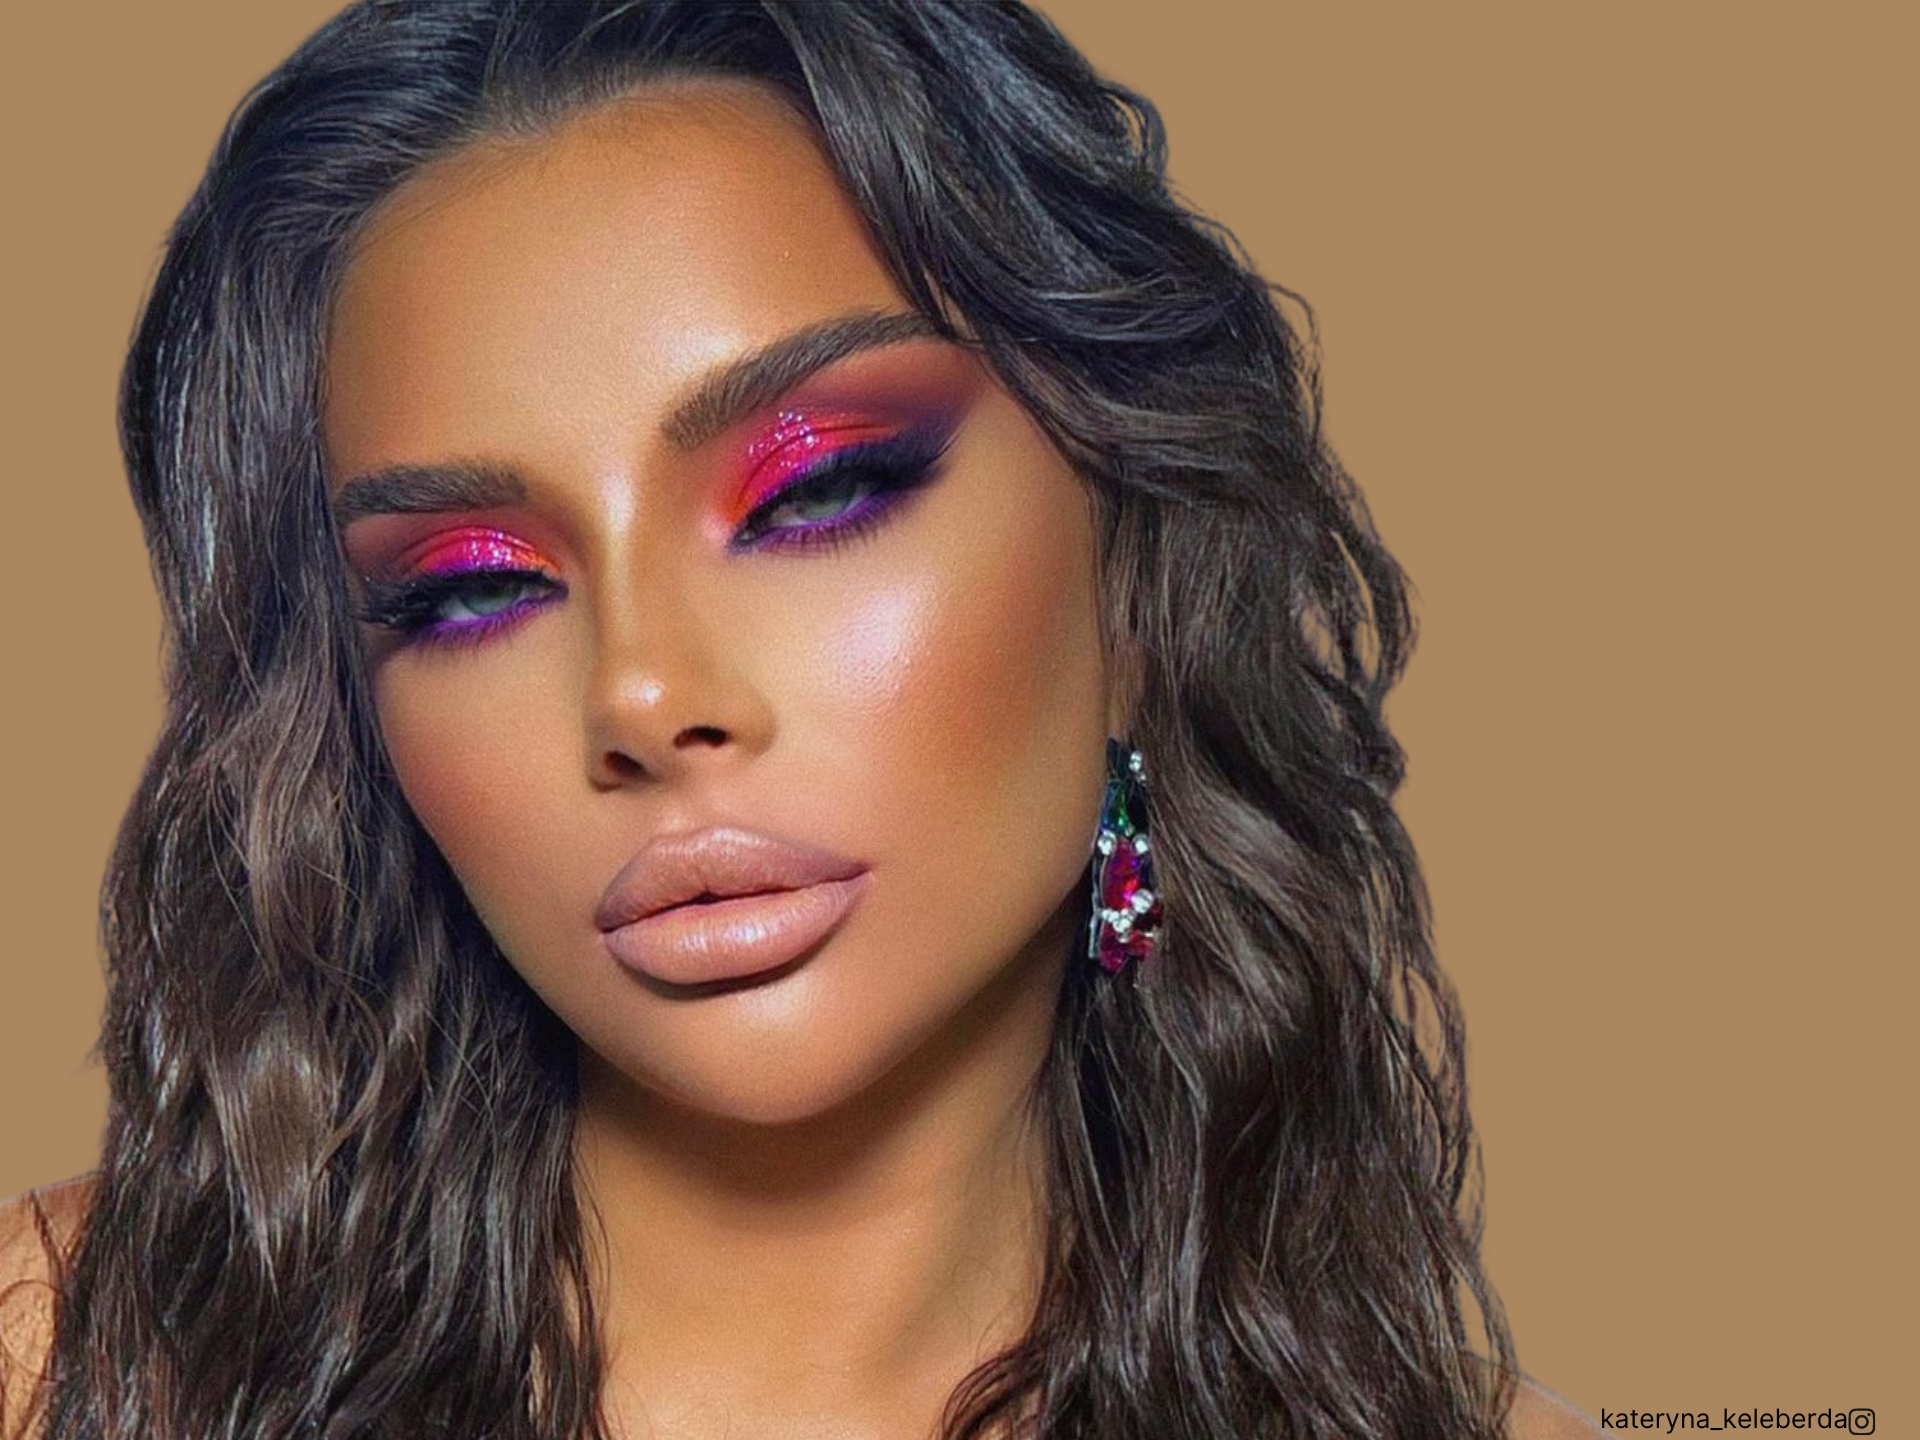 These 20 Unique Makeup Looks Are Worth The Hype